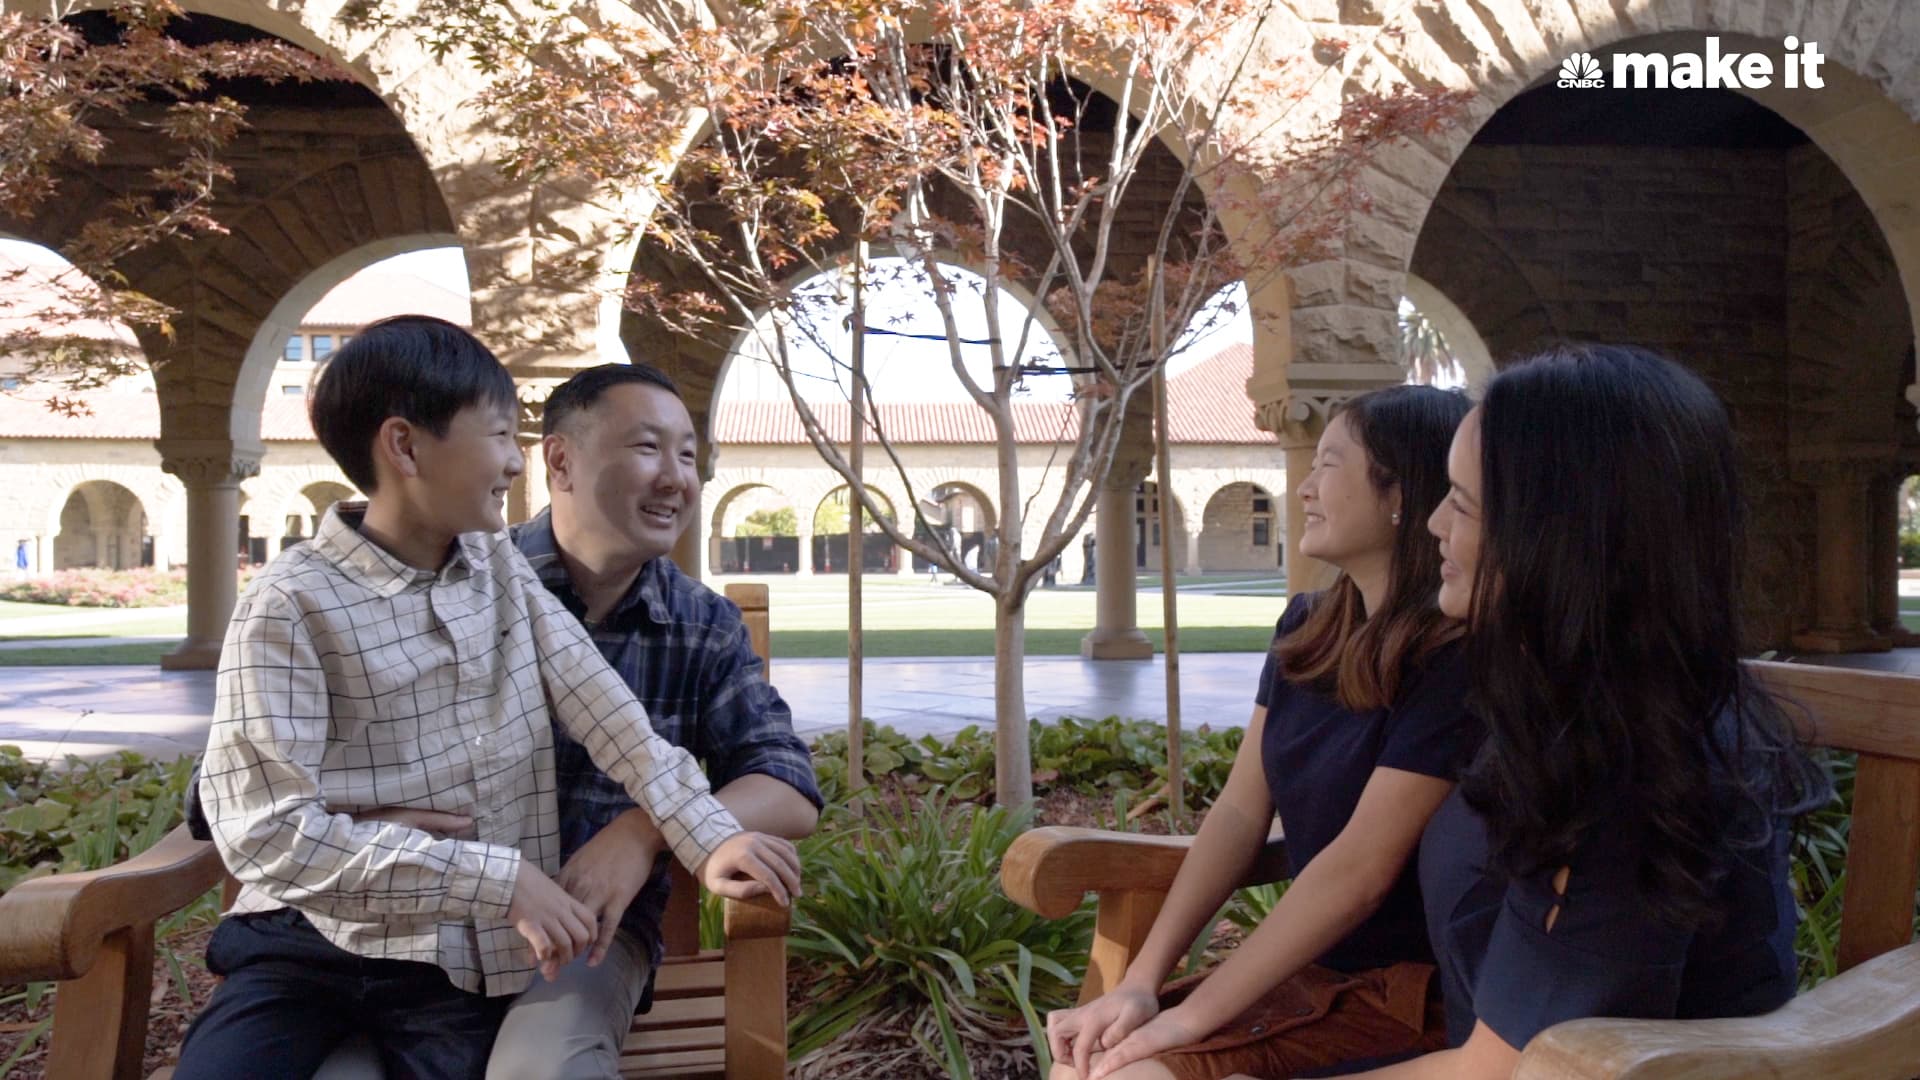 Setting their own hours allows Jen and Steve Chou to spend more time with their two children.